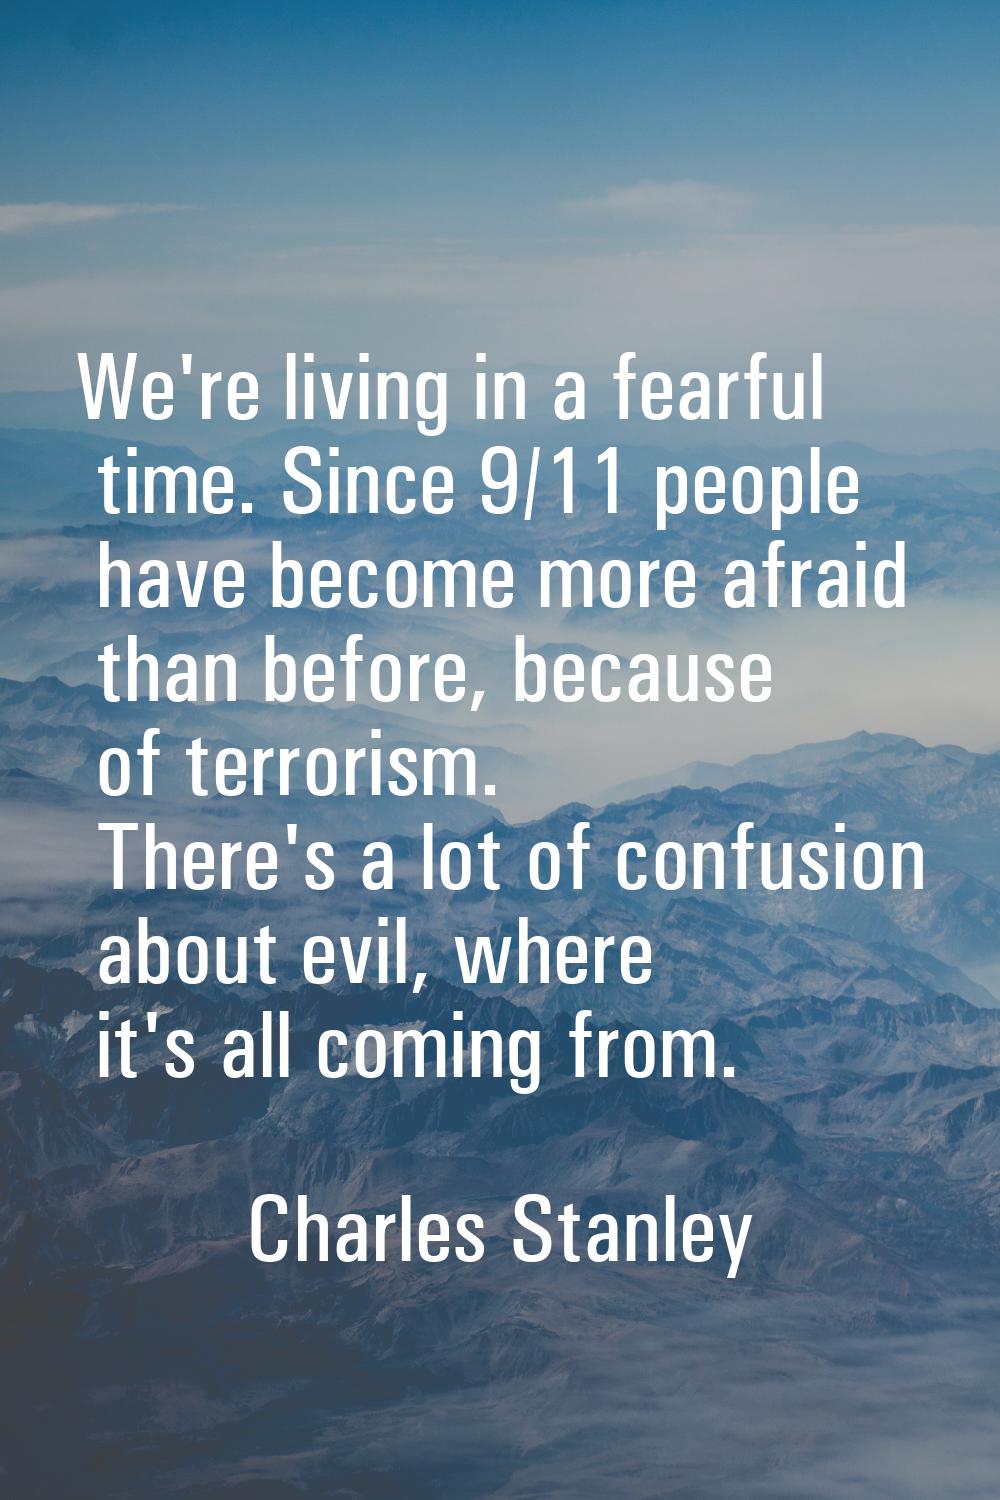 We're living in a fearful time. Since 9/11 people have become more afraid than before, because of t